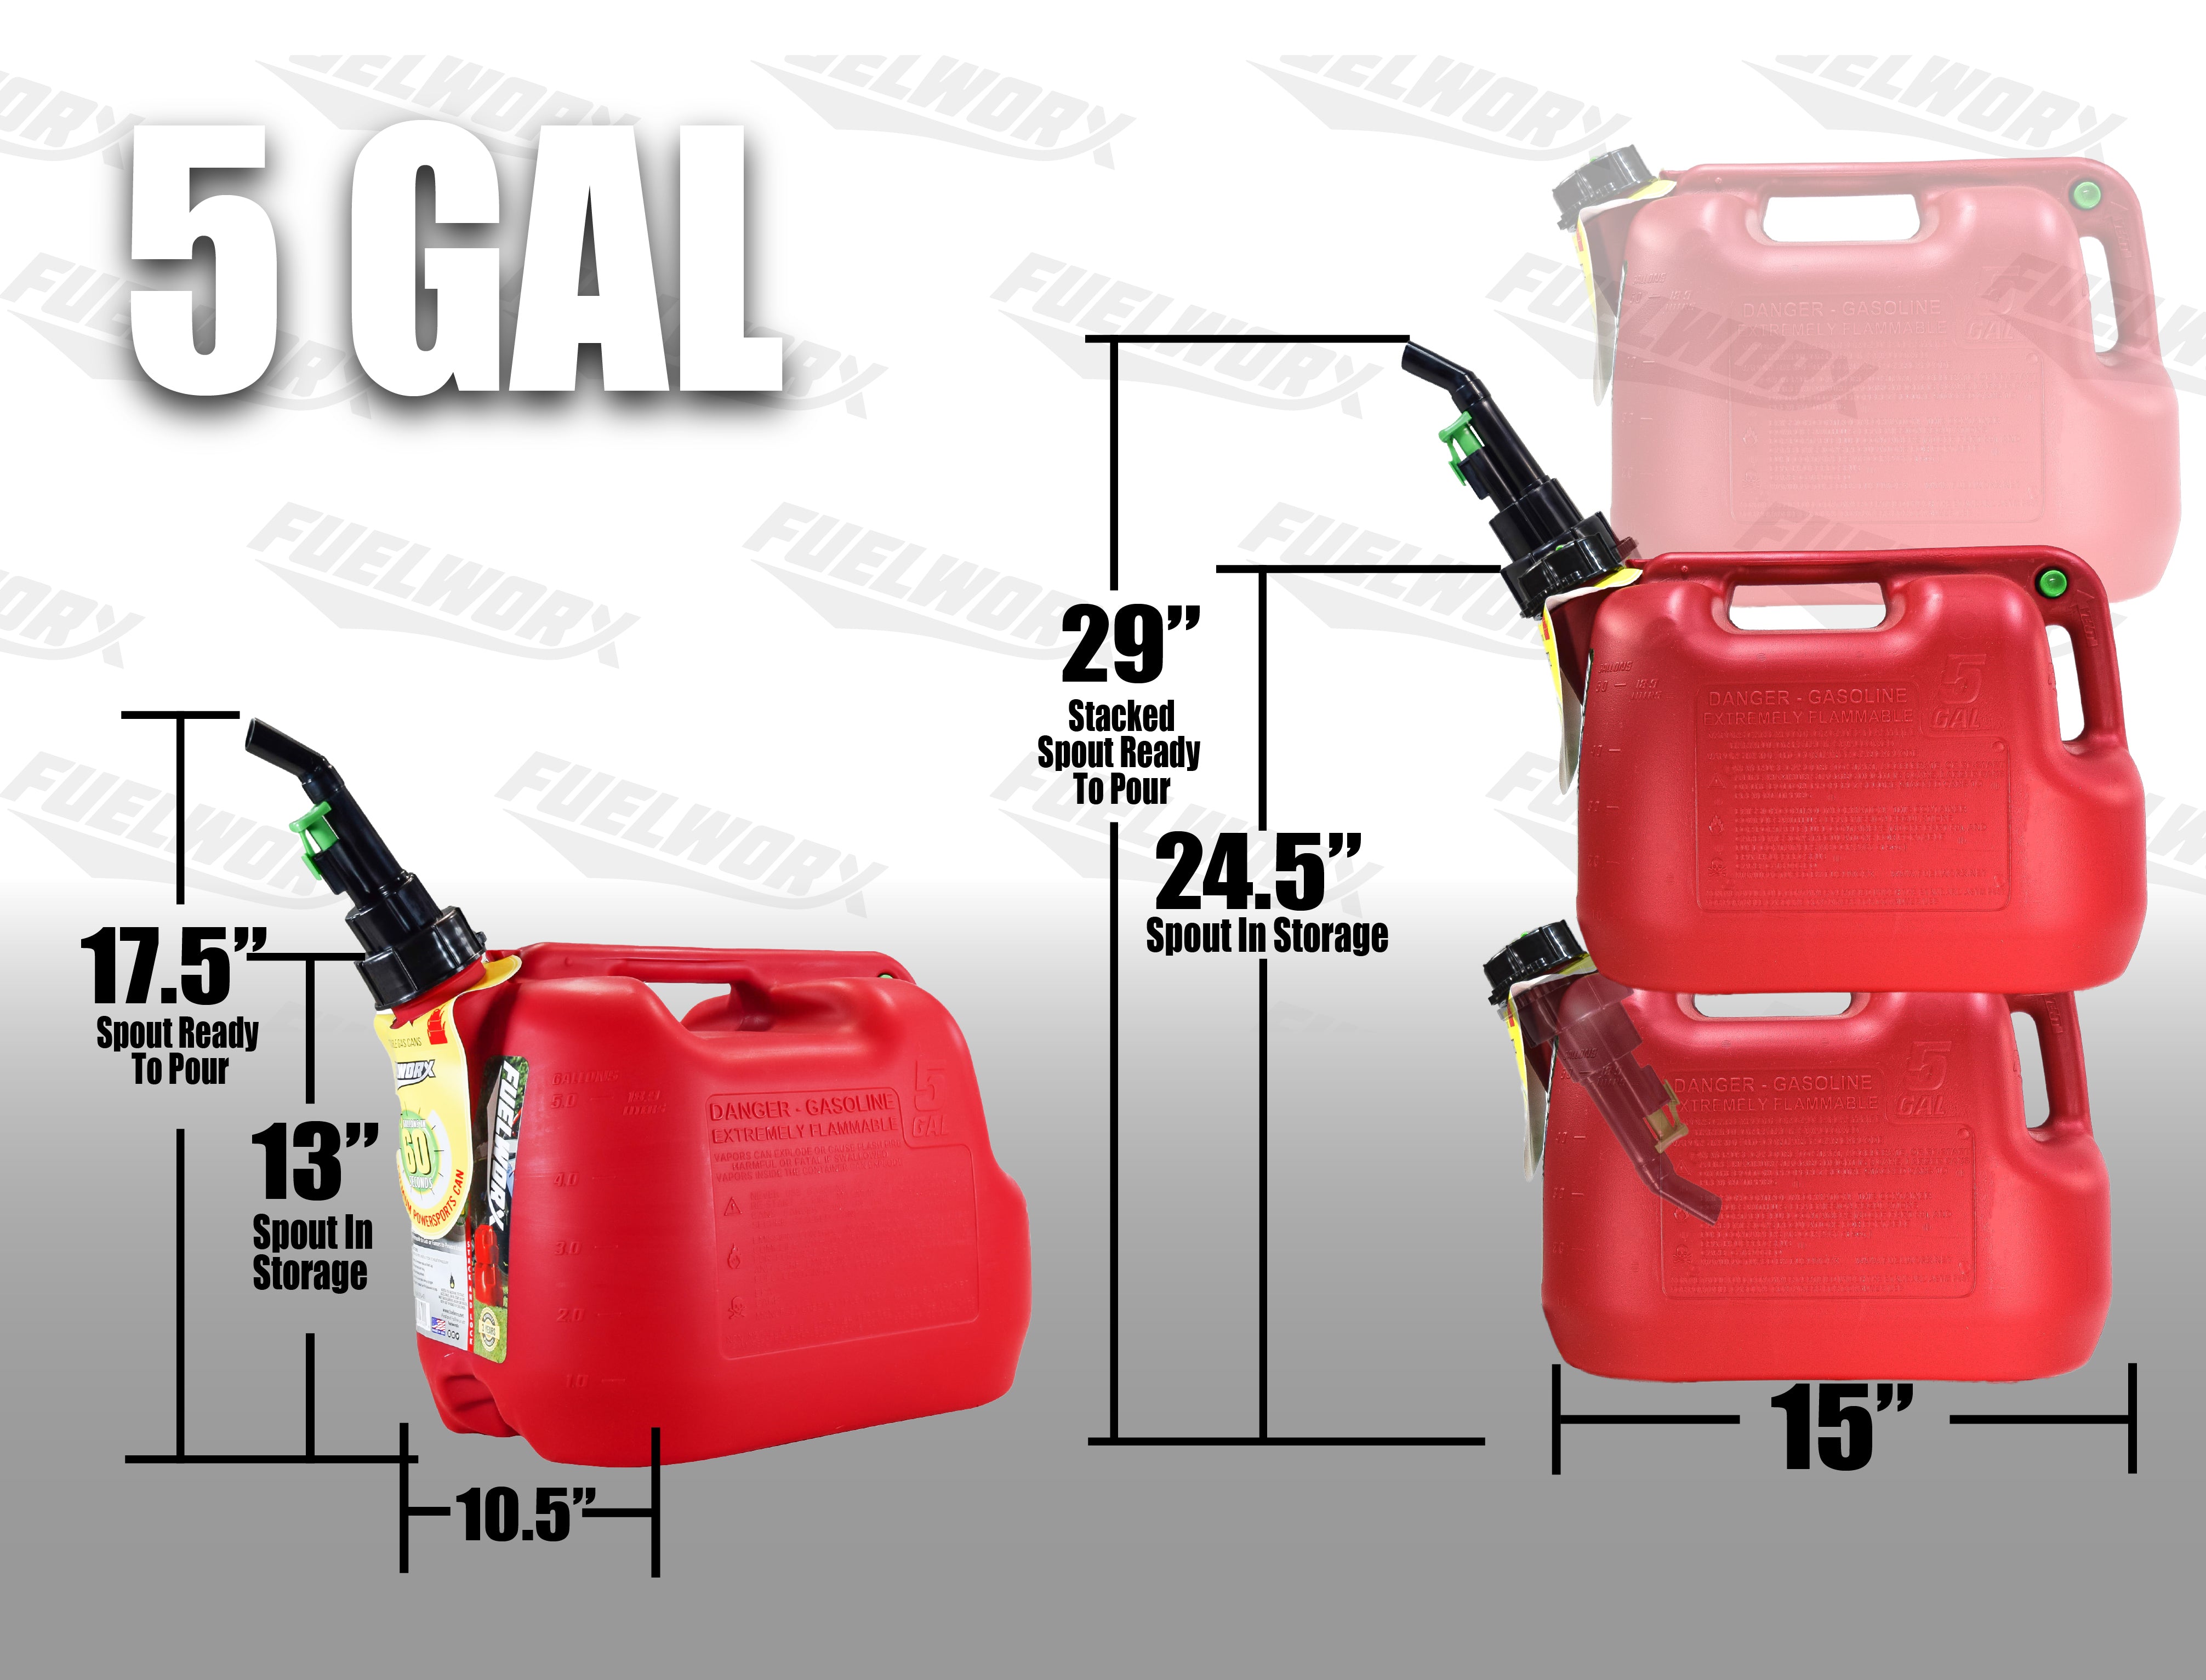 Fuelworx-Red-5-Gallon-Stackable-Fast-Pour-Gas-Fuel-Can-CARB-Compliant-Made-in-The-USA-5-Gallon-Gas-Can-2-Pack-image-5